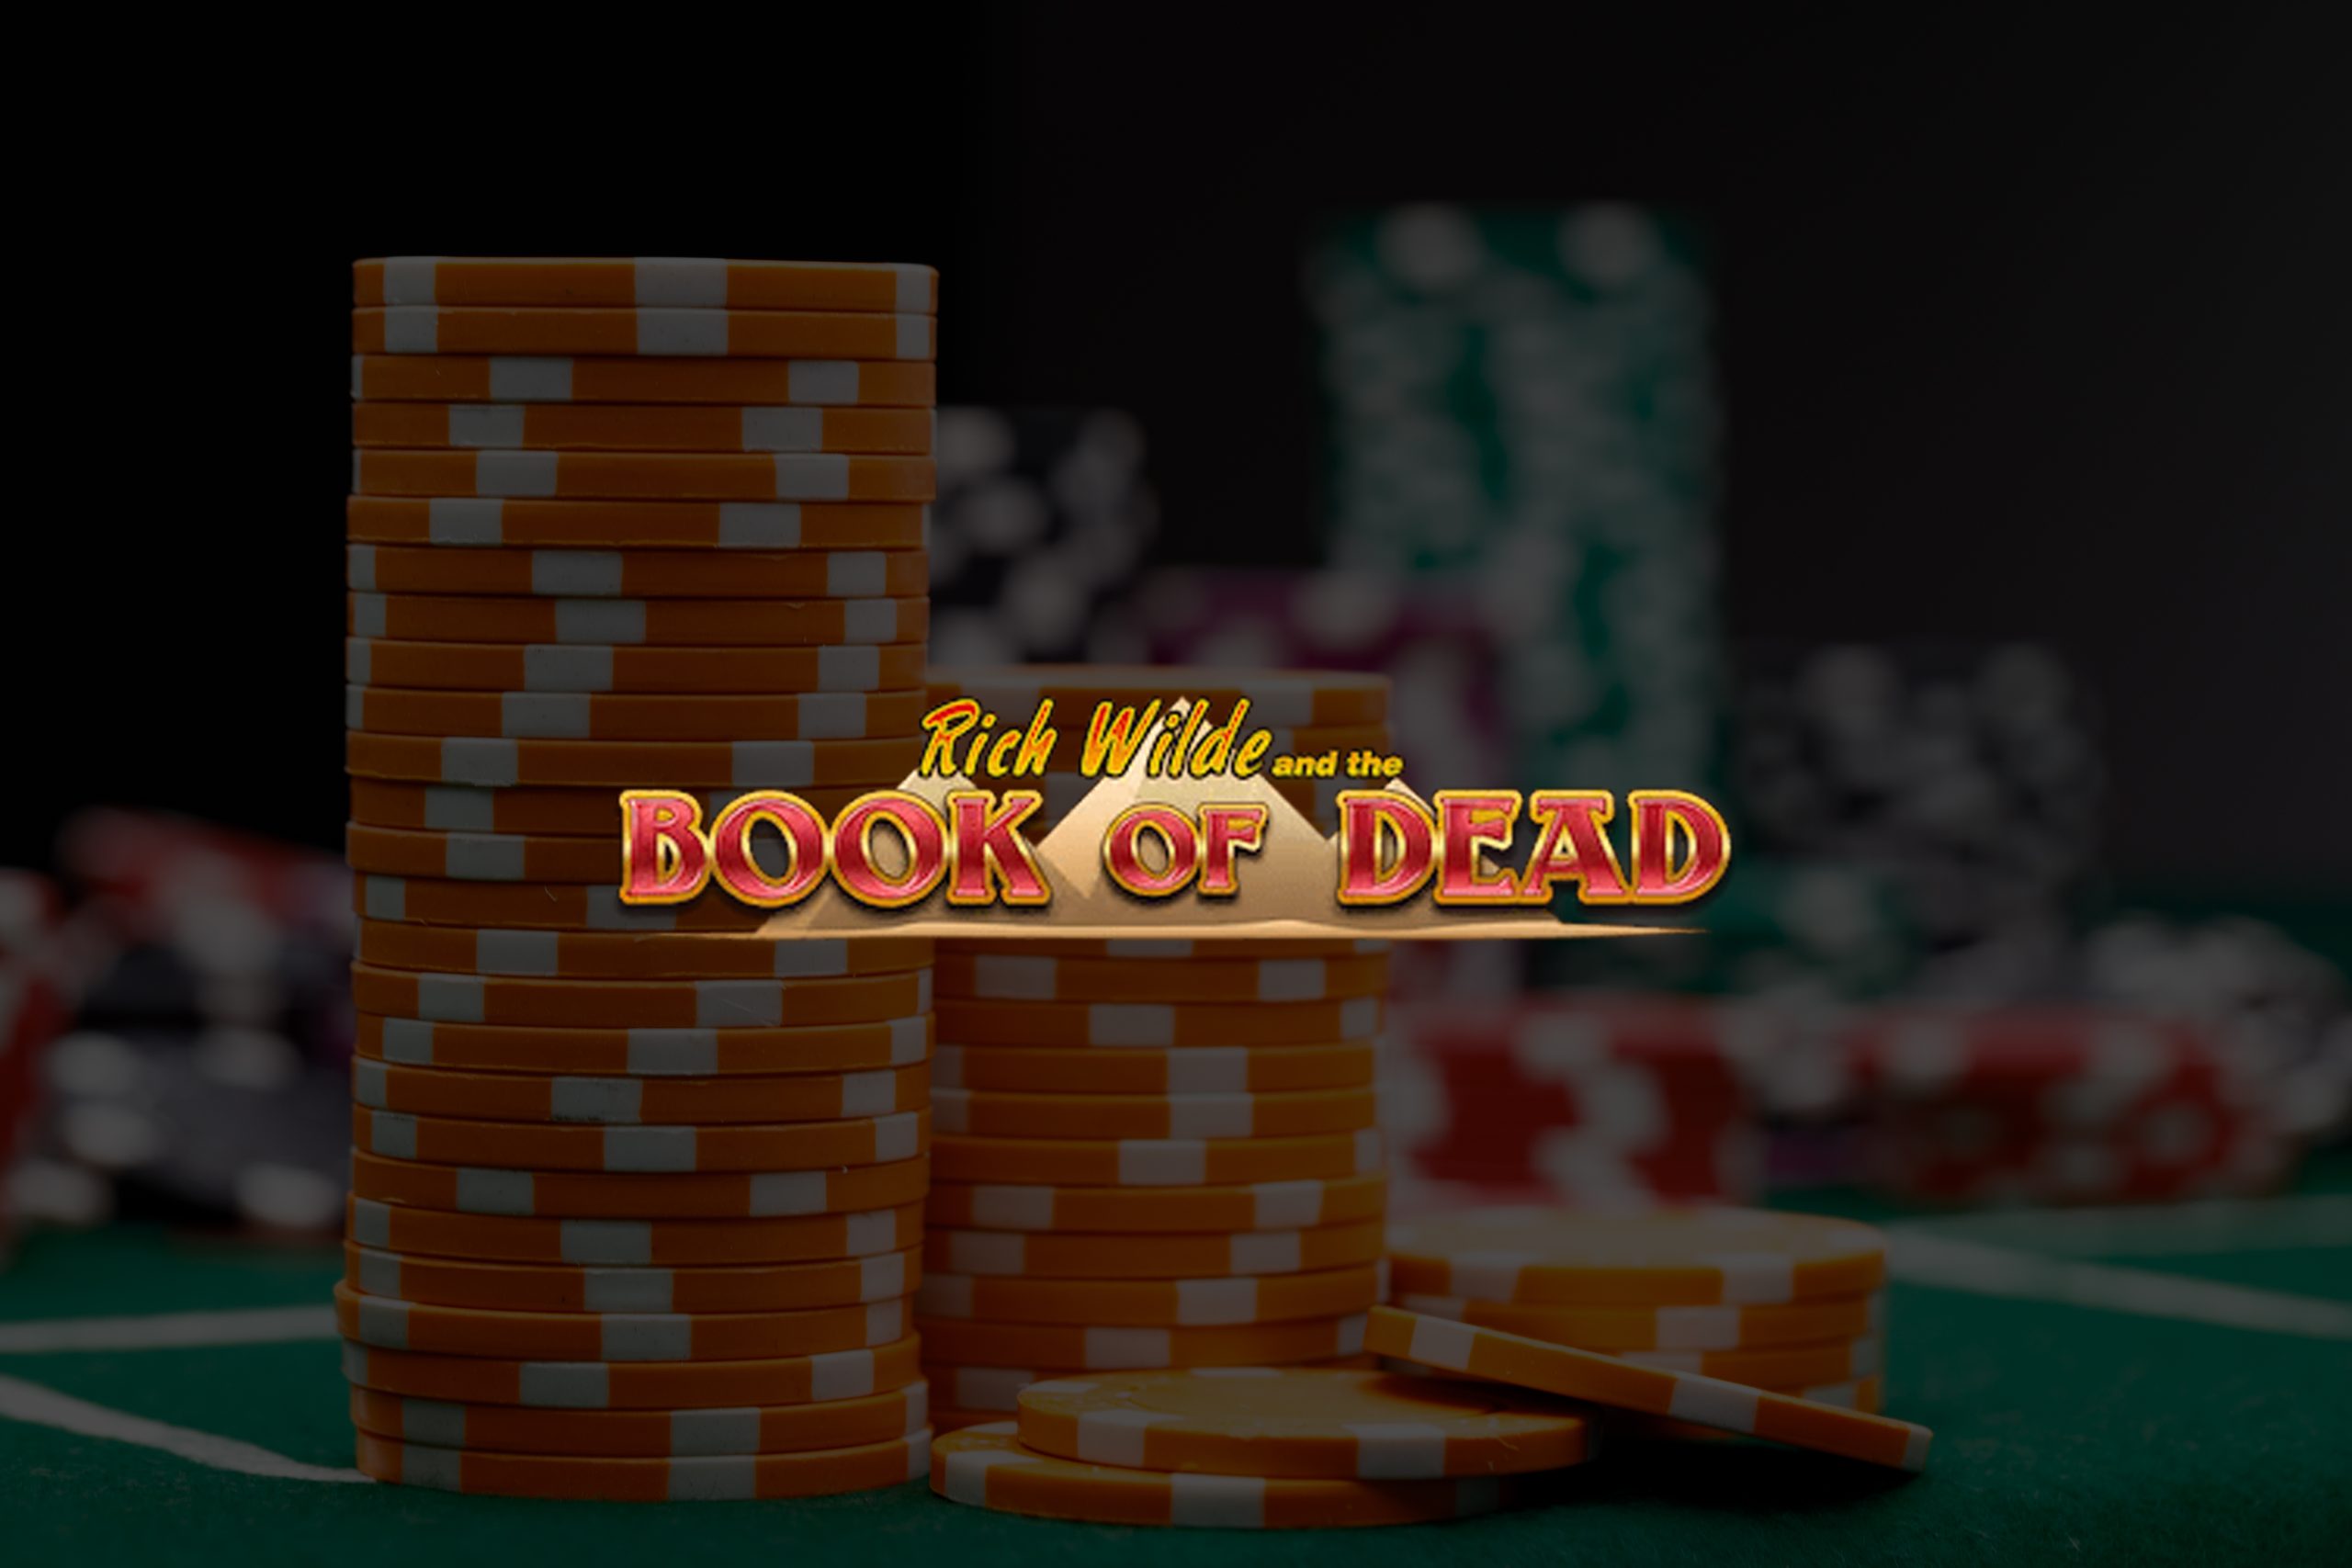 Review On Book Of Dead by Play’n GO: Not On Gamstop 